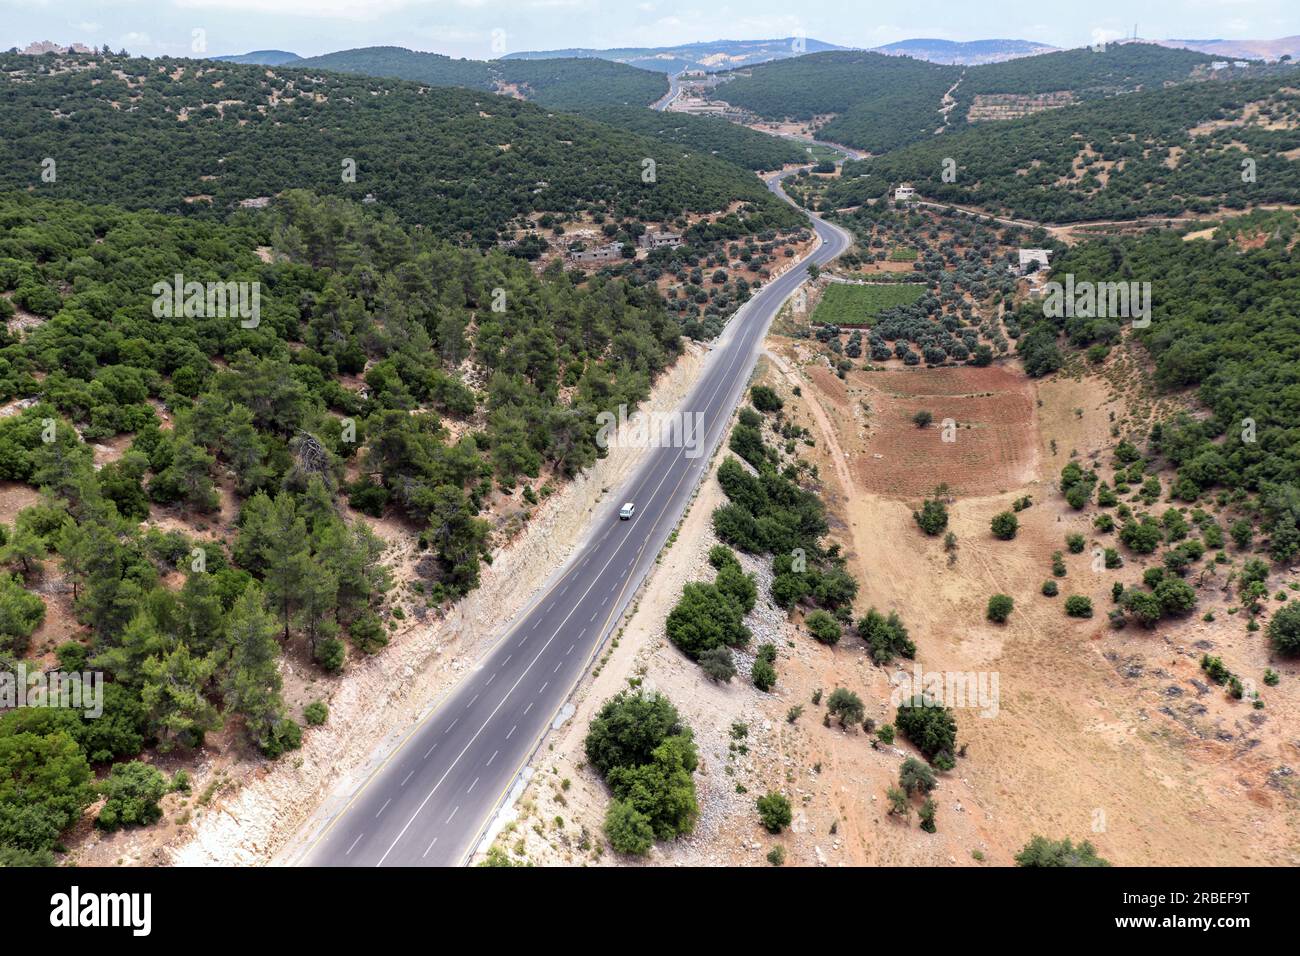 Travel among cities - An aerial view of the forests, trees, mountains of Ajloun, its streets and roads taken from the Ajloun cable car (Ajloun, Jordan Stock Photo